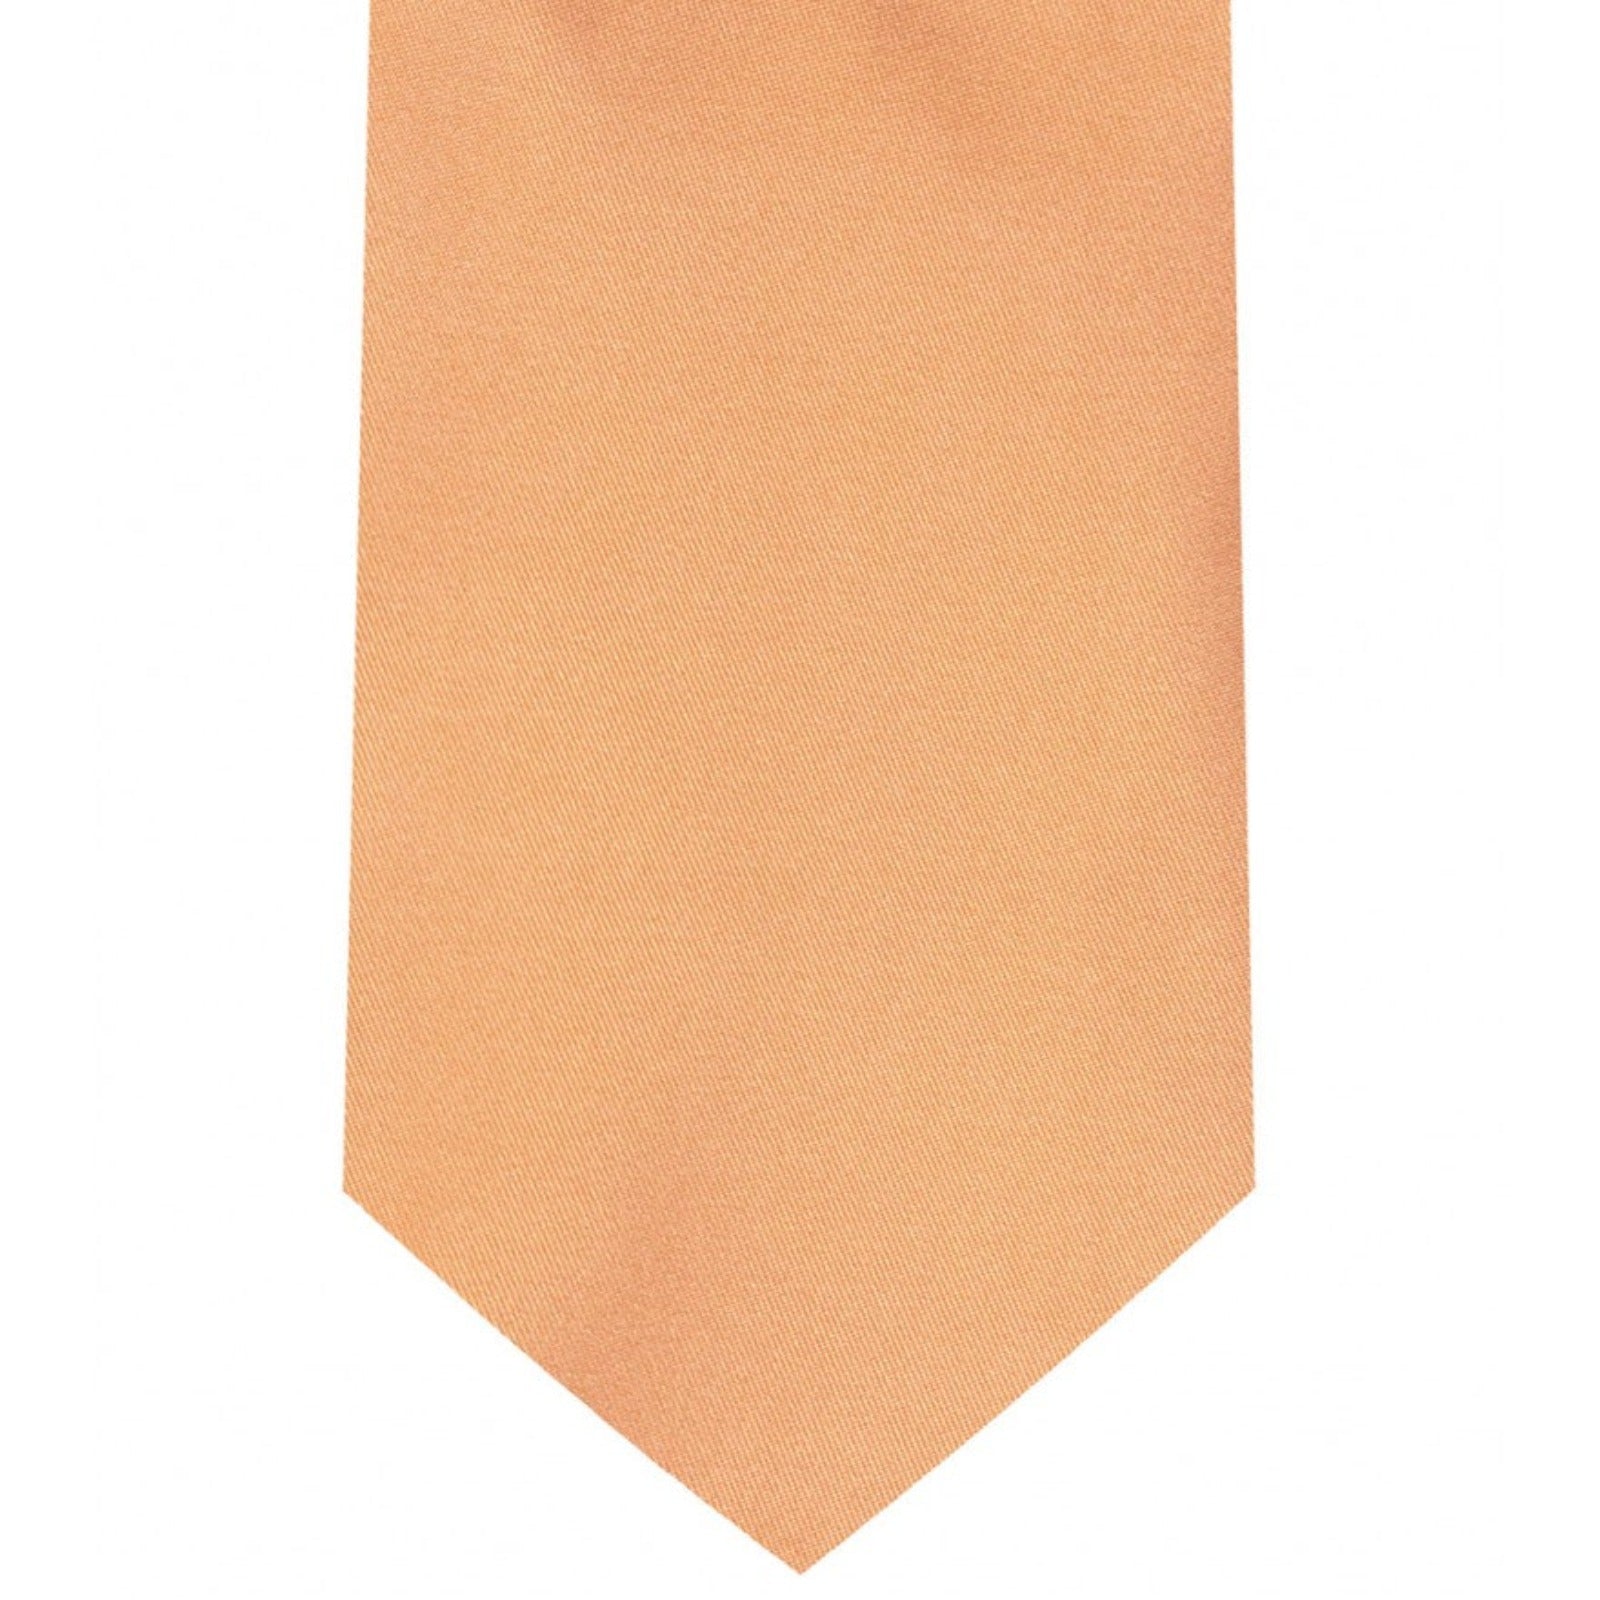 Classic Peach Tie Regular width 3.5 inches With Matching Pocket Square | KCT Menswear